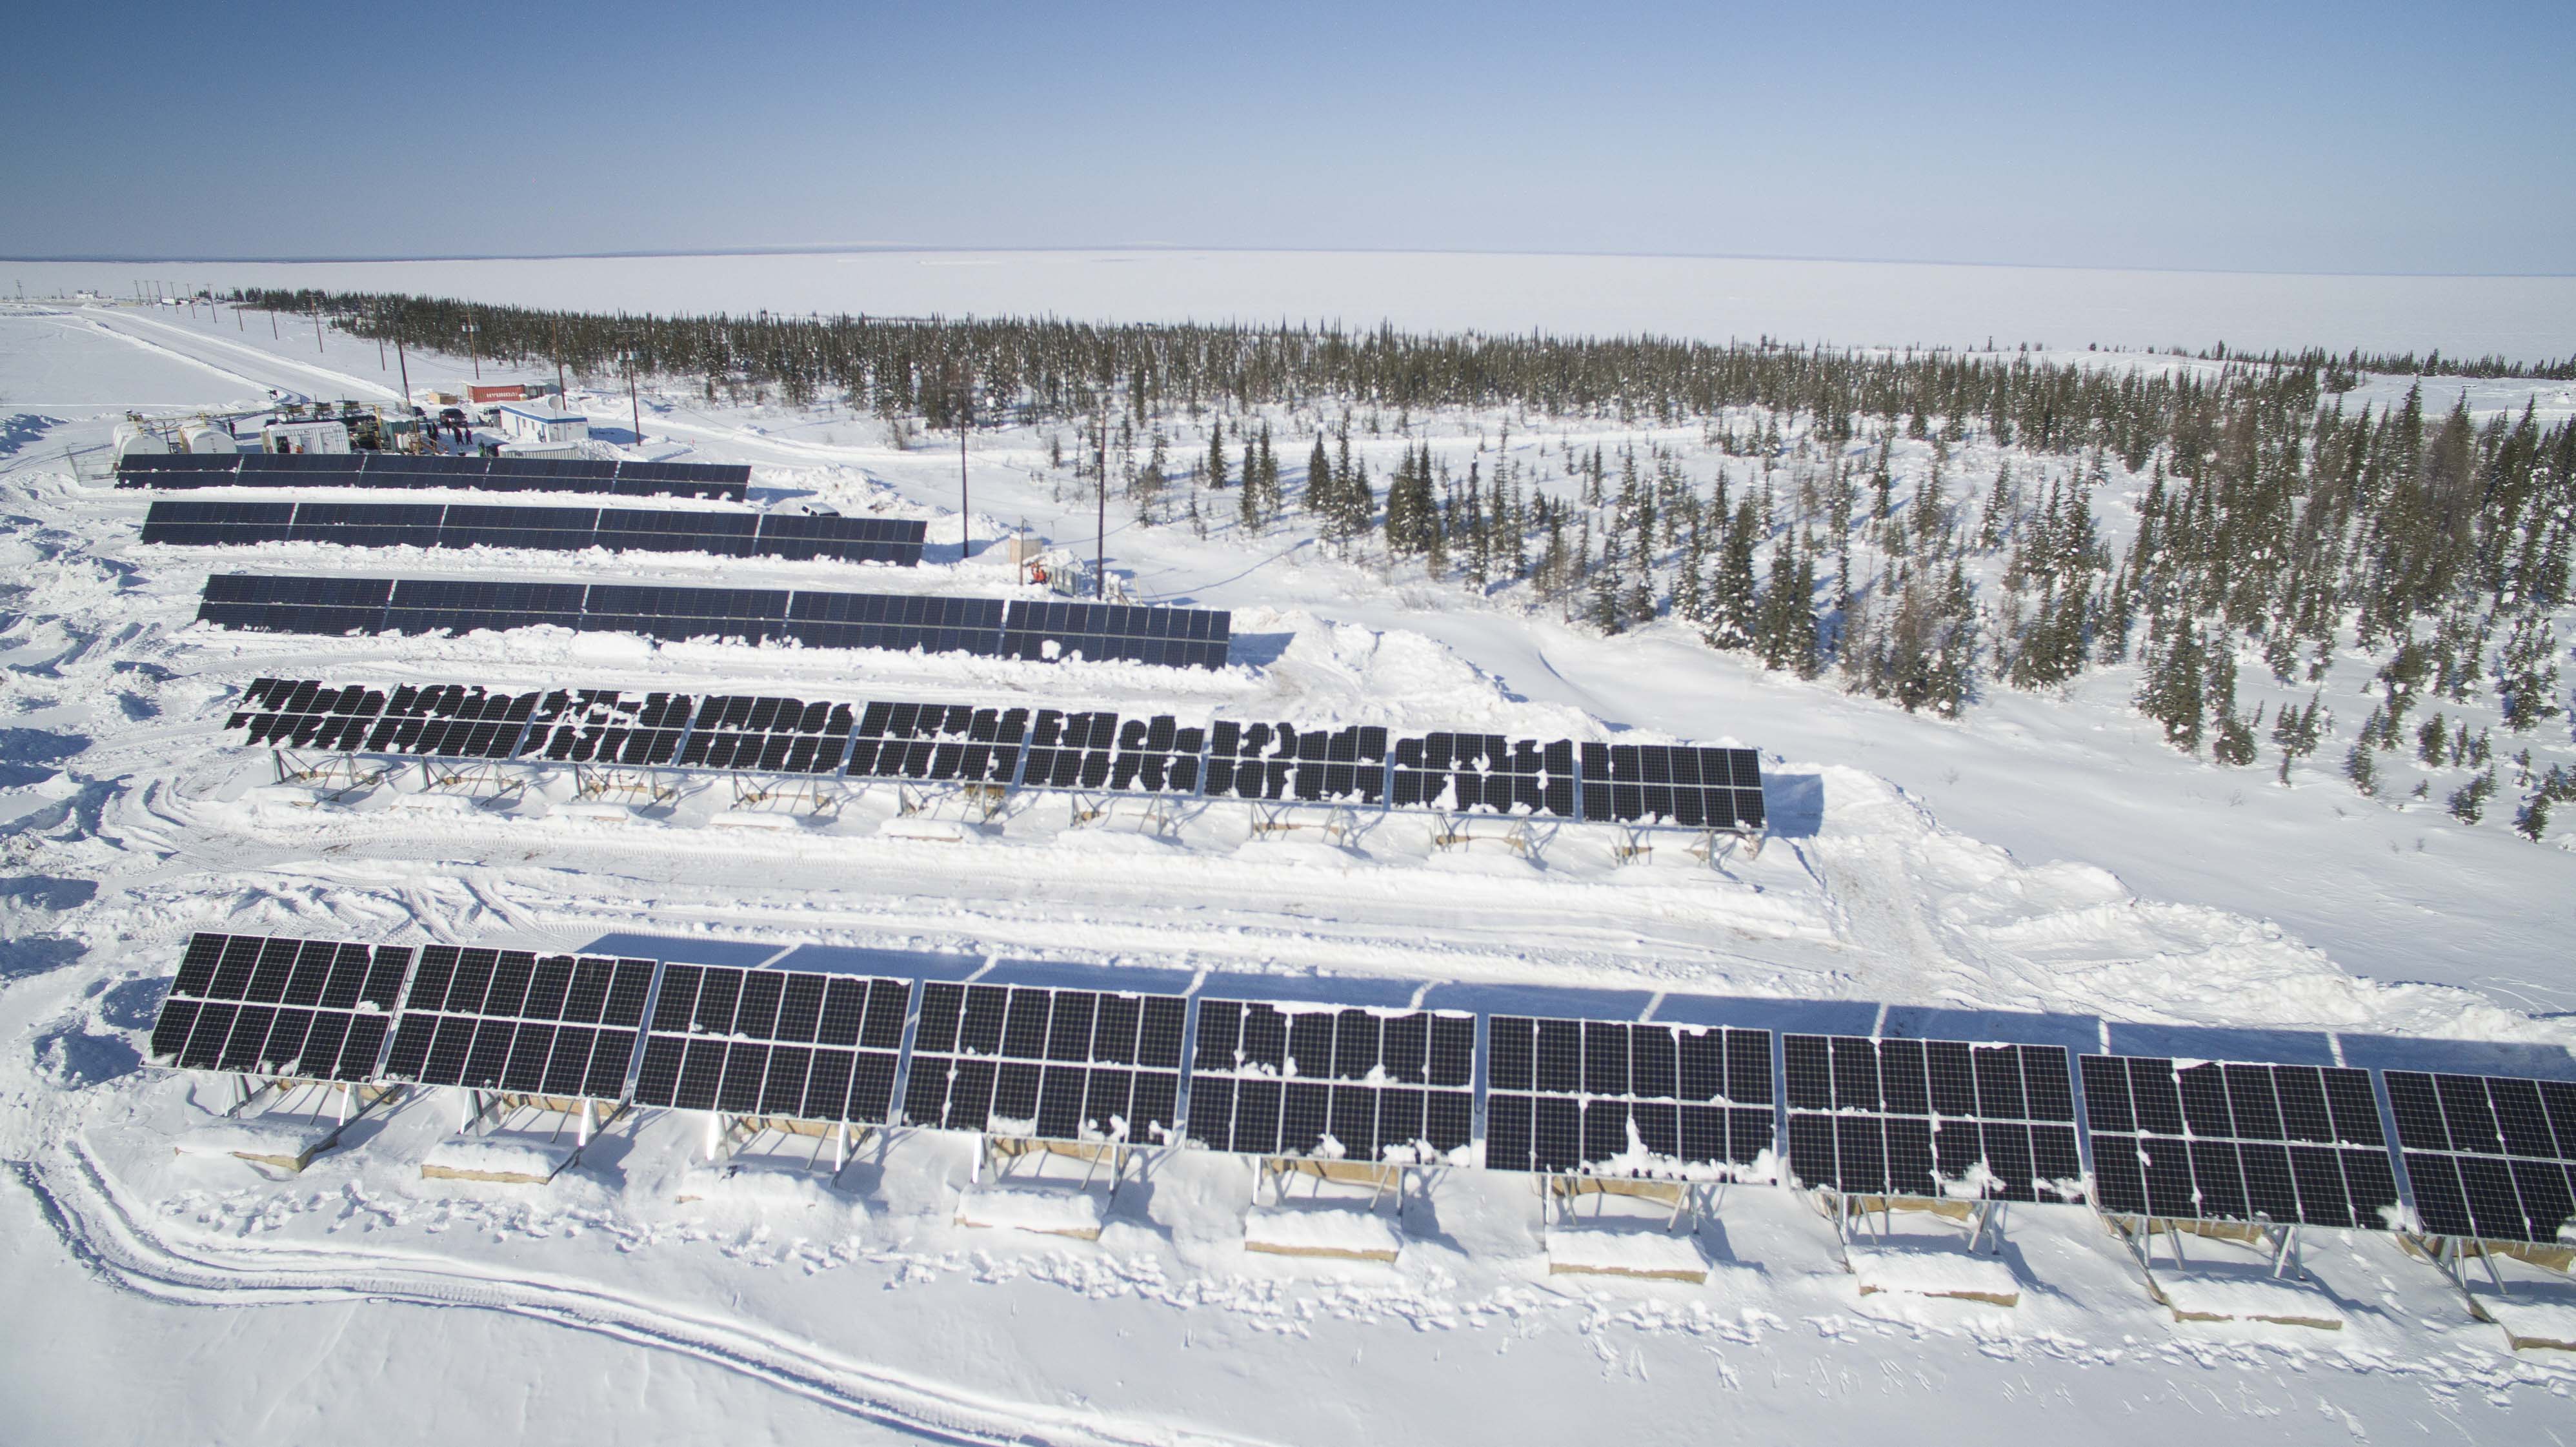 ACEP, Arctic Lab Partnerships, Arctic Energy Office … the ‘A’s’ have it!